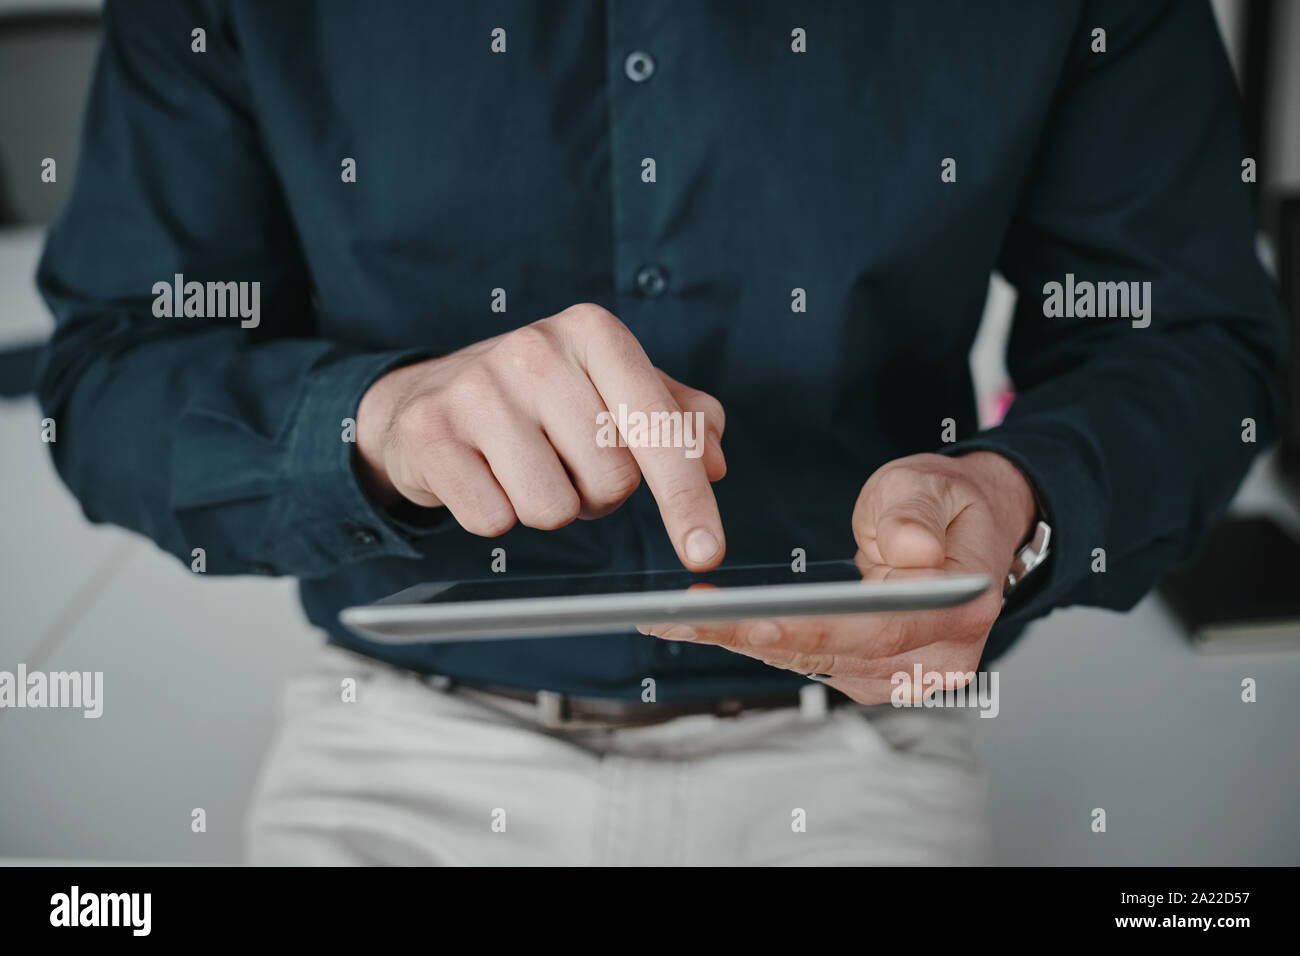 Midsection of businessman wearing shirt touching blank screen digital tablet with finger Stock Photo